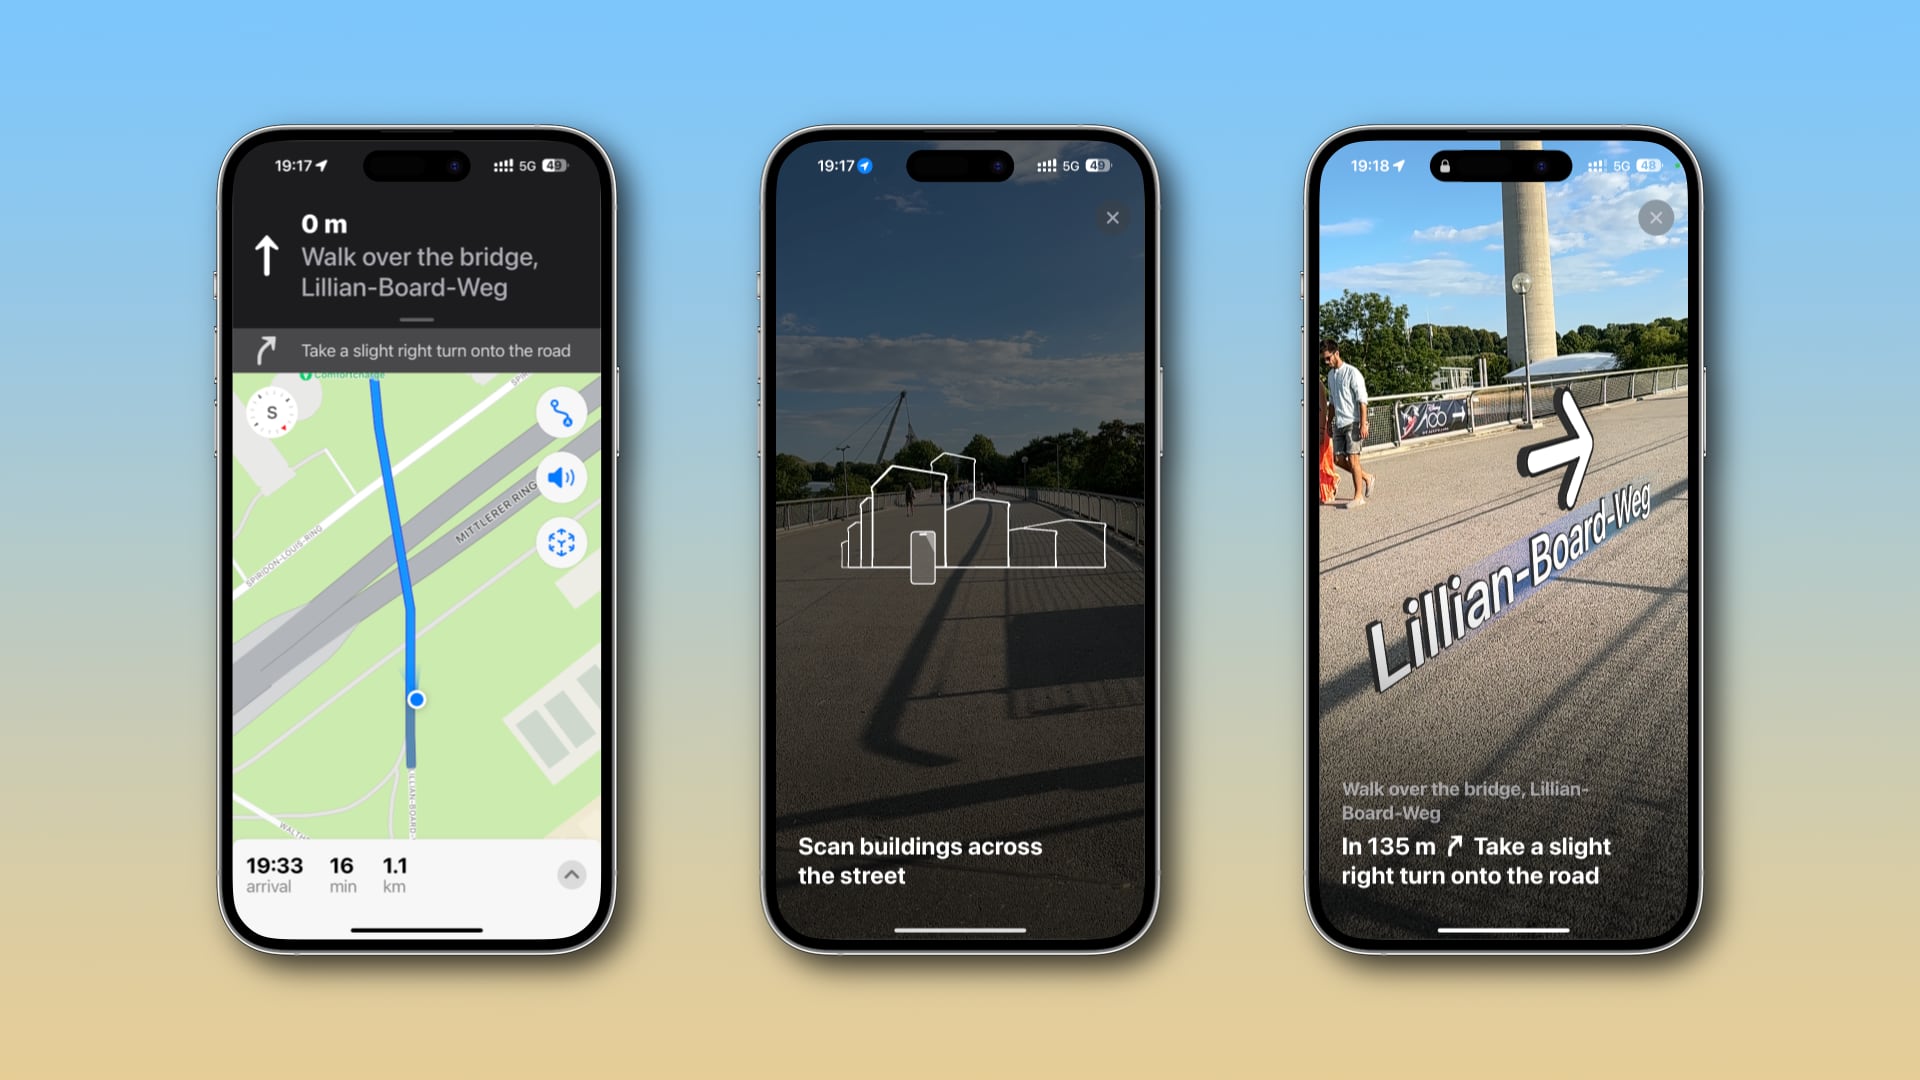 Navigating with Apple Maps on iPhone using walking directions in augmented reality